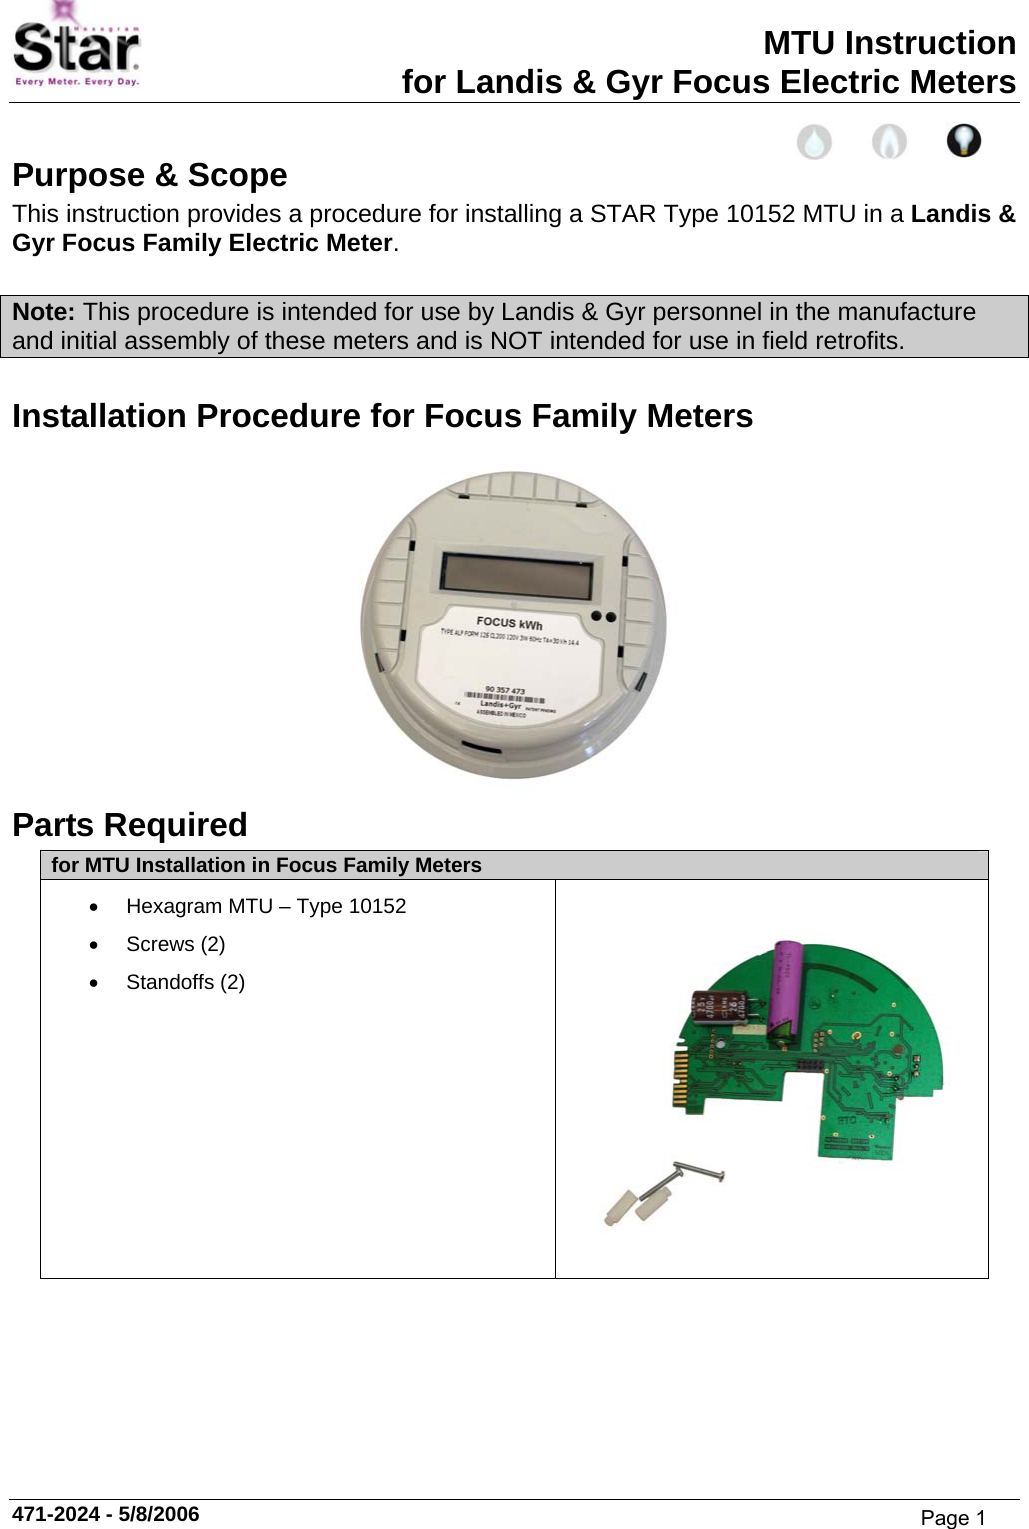 MTU Instruction for Landis &amp; Gyr Focus Electric Meters Purpose &amp; Scope This instruction provides a procedure for installing a STAR Type 10152 MTU in a Landis &amp; Gyr Focus Family Electric Meter.  Note: This procedure is intended for use by Landis &amp; Gyr personnel in the manufacture and initial assembly of these meters and is NOT intended for use in field retrofits. Installation Procedure for Focus Family Meters  Parts Required for MTU Installation in Focus Family Meters •  Hexagram MTU – Type 10152 • Screws (2) • Standoffs (2)   471-2024 - 5/8/2006 Page 1